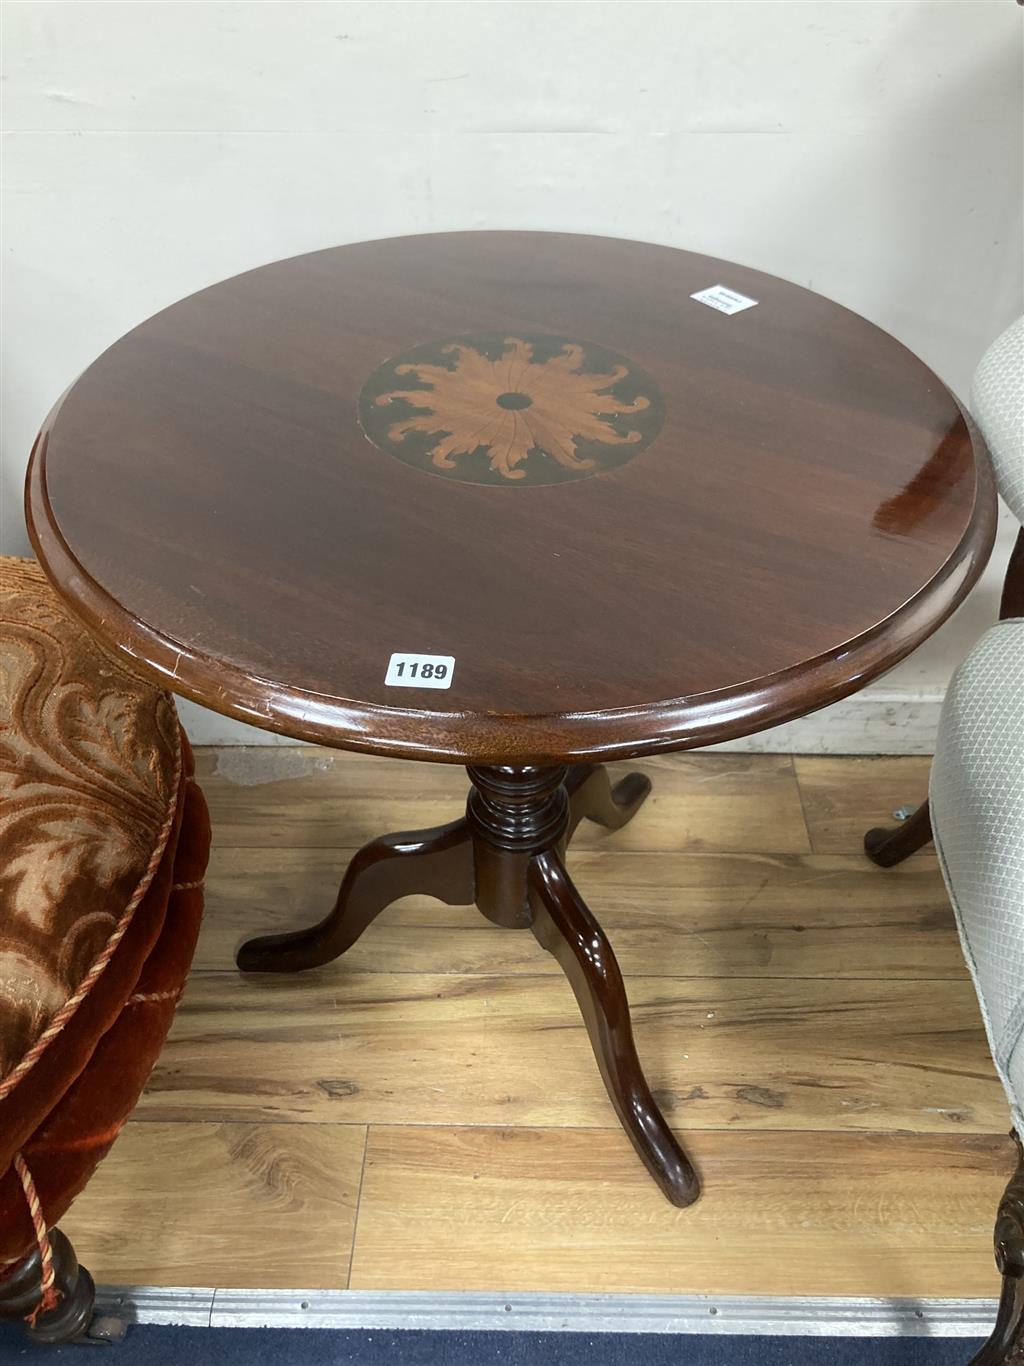 A George III mahogany and later inlaid circular topped tea table, c.1780, diameter 60cm, height 64cm